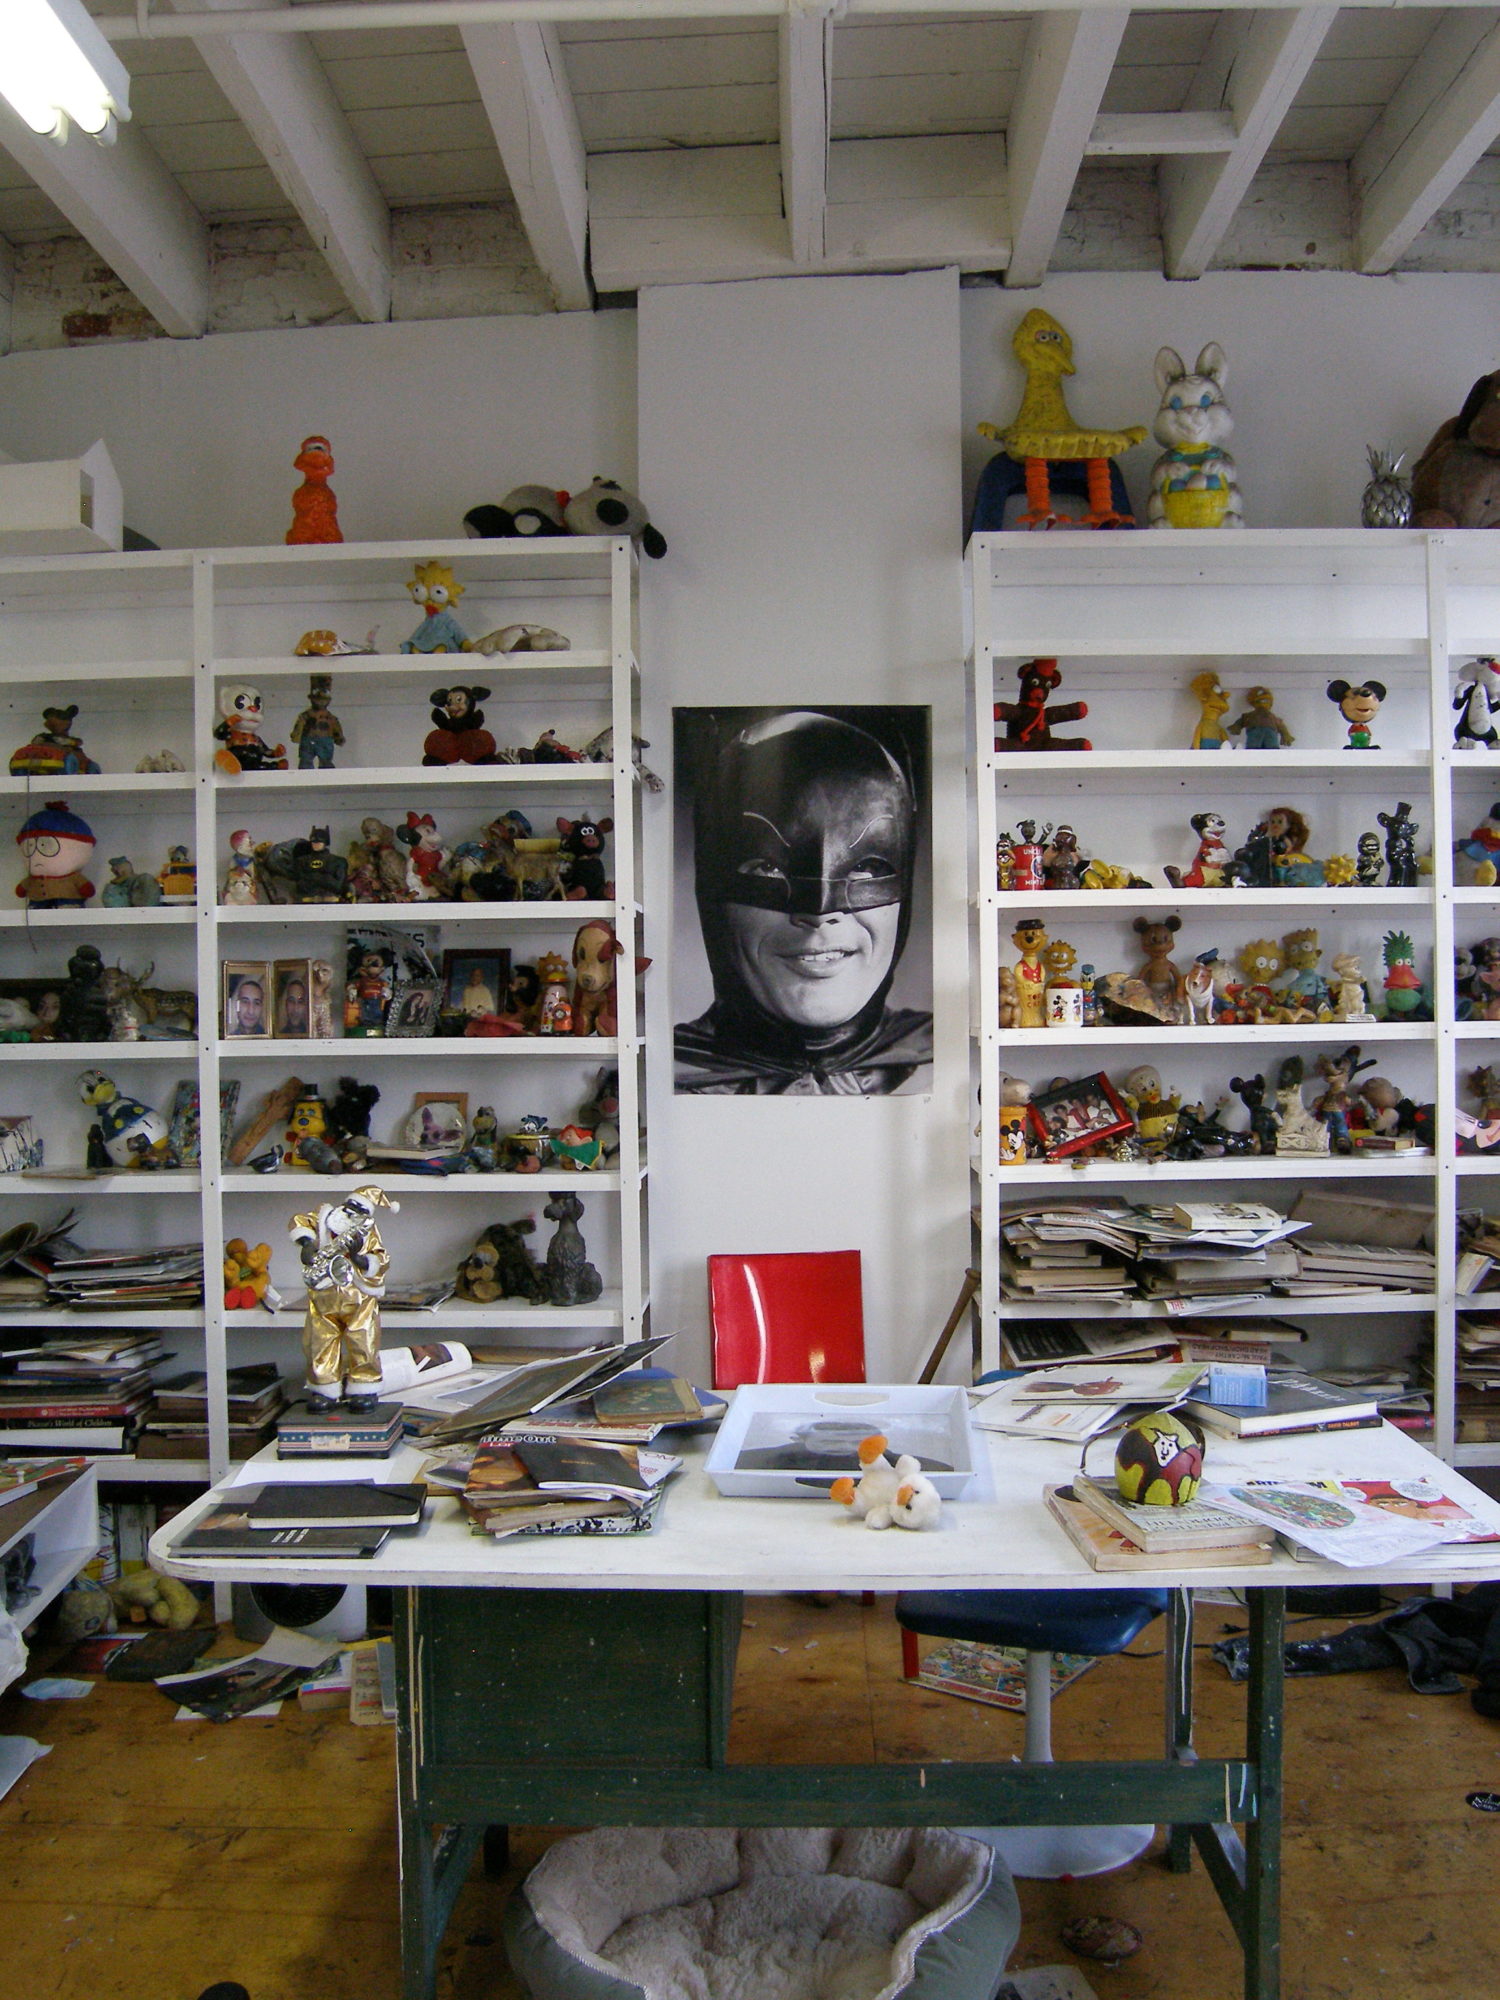 Photograph of artist's studio. Very cluttered, with papers and toys and art material strewn about shelves and tables.